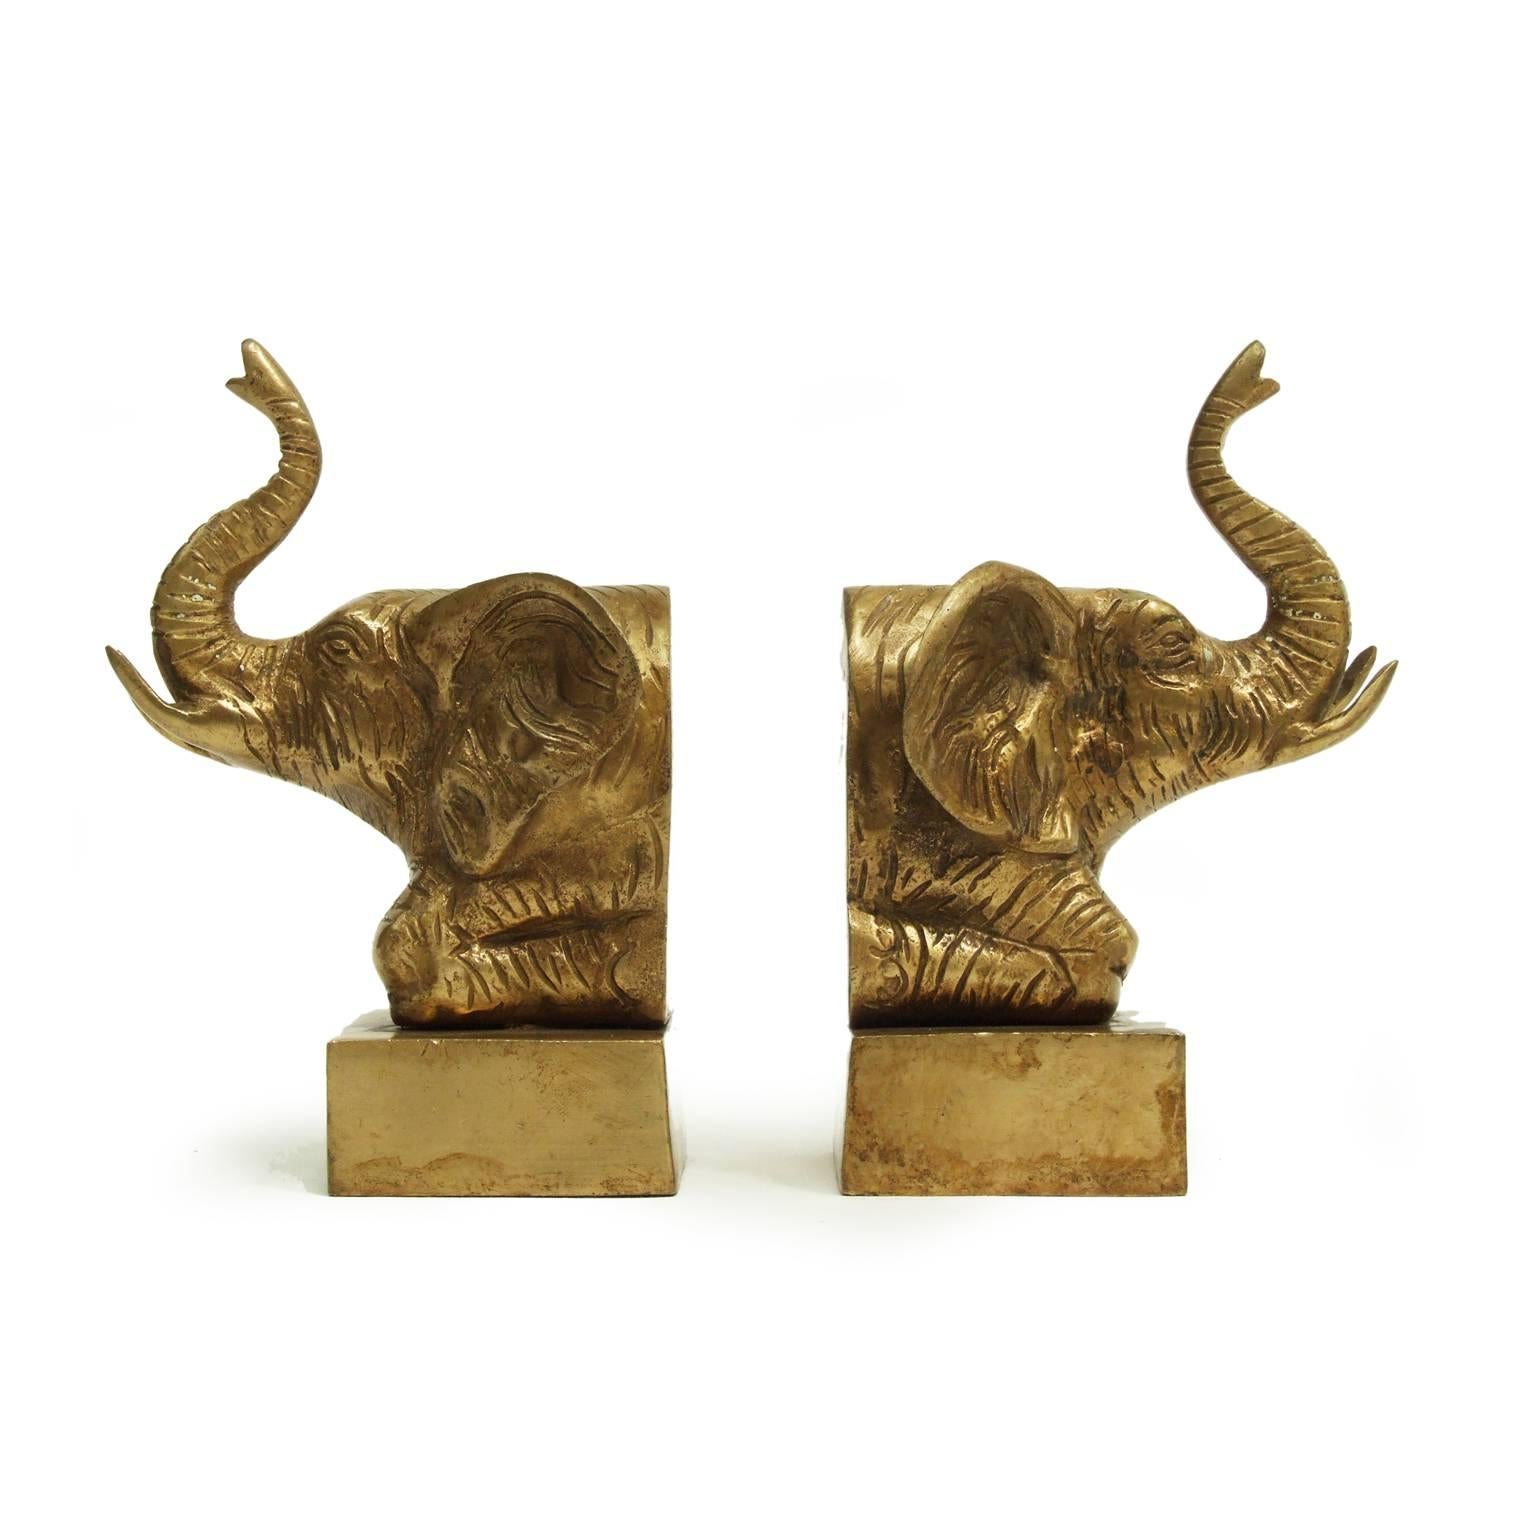 Pair of 1950s elephant bookends designed and manufactured in France. Cast brass elephant figures with brass plinths.

Measure: H 18cm x L 12cm x D 7cm.